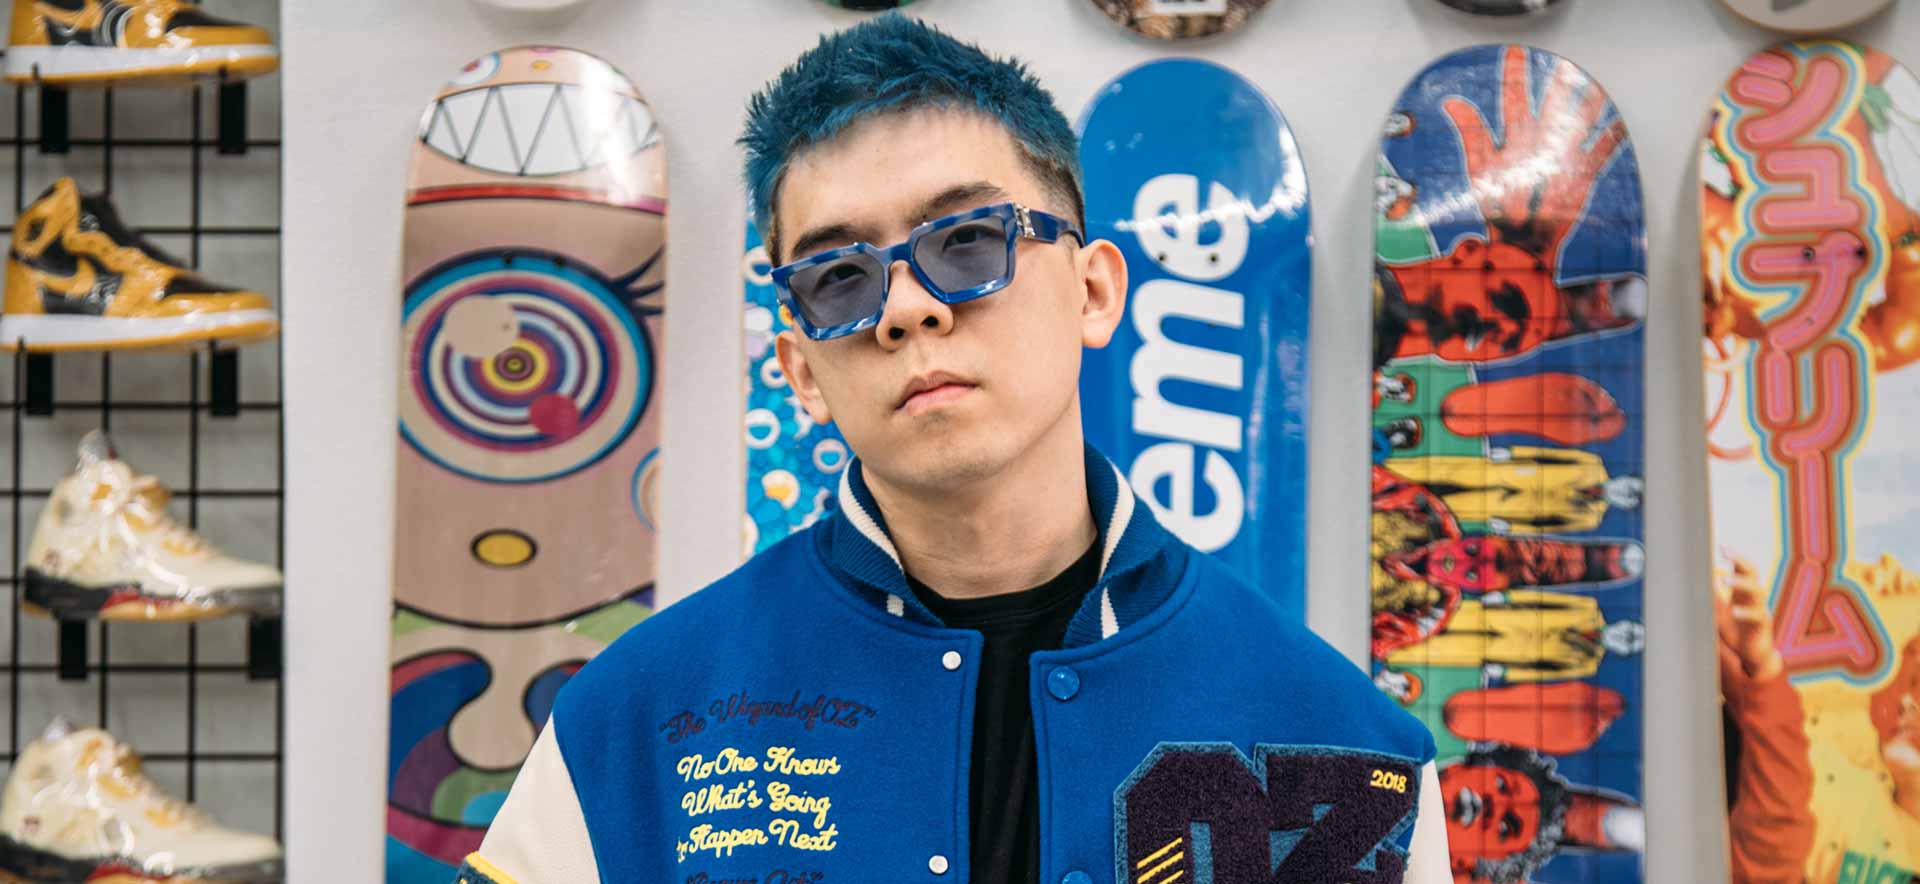 Jiahuan Green Xia with blue hair and sunglasses in front of a wall of sneakers and skateboards